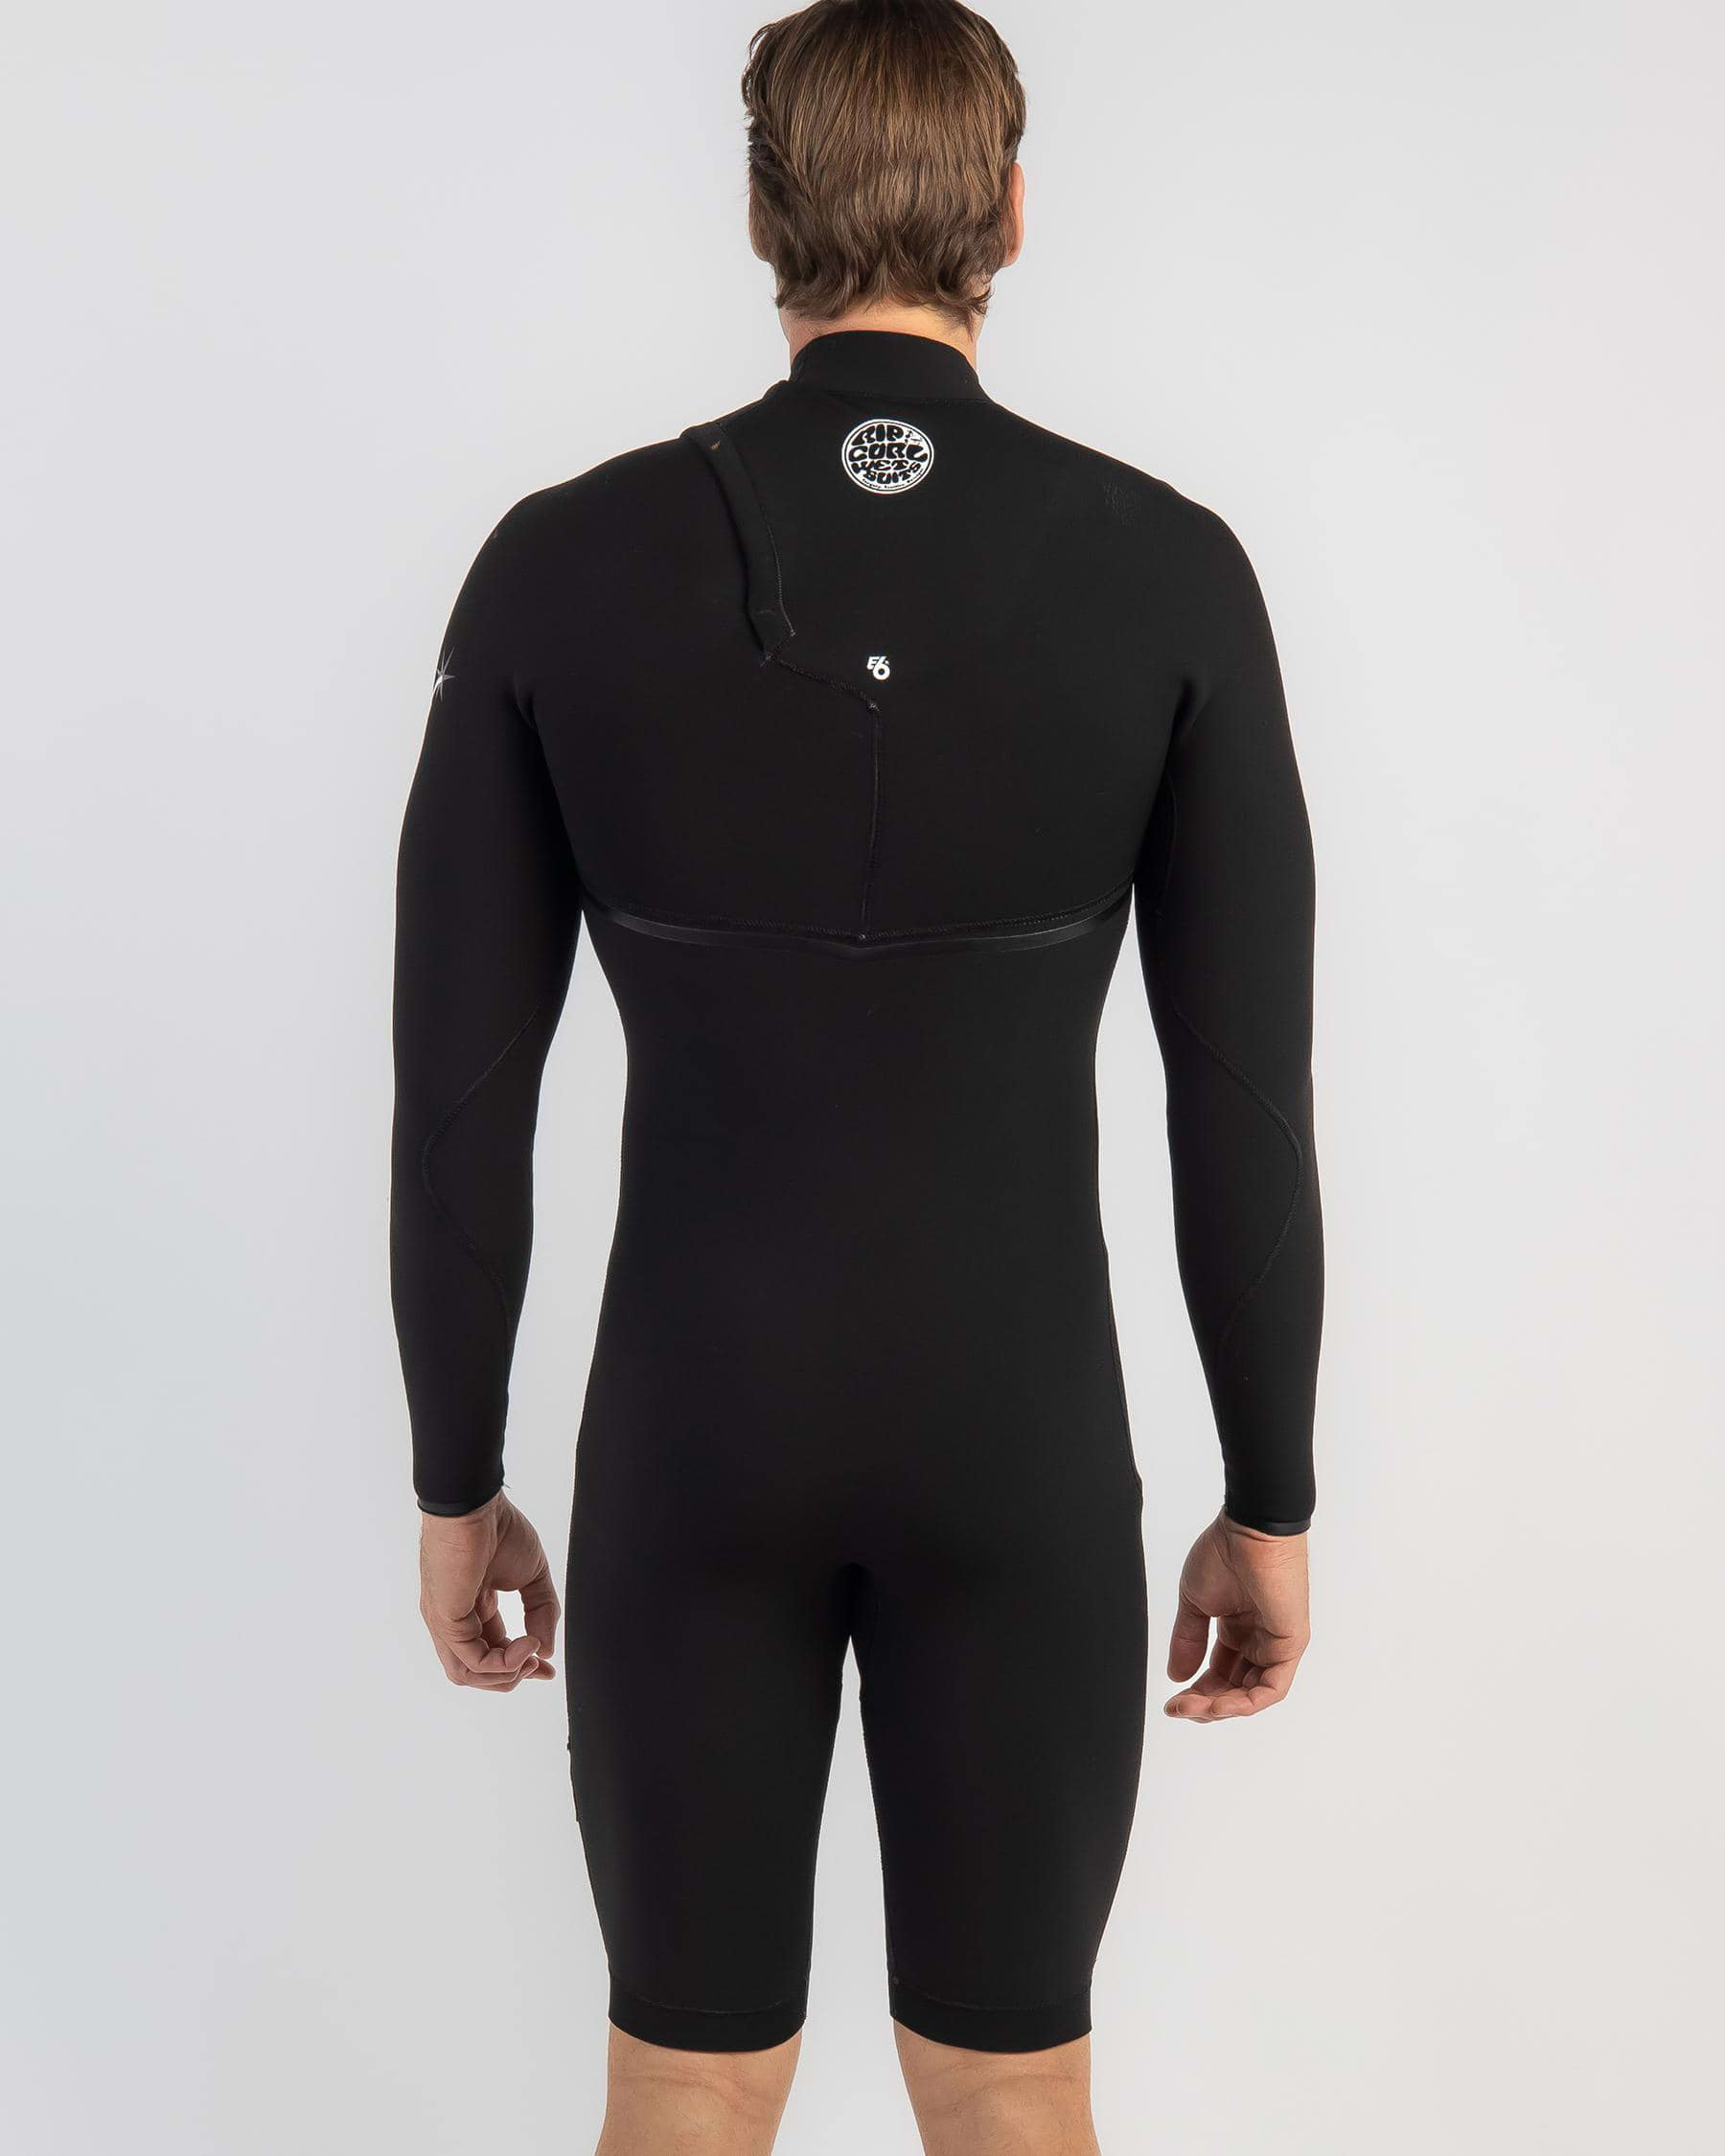 Rip Curl E-Bomb Long Sleeve 2mm Spring Suit In Black - Fast Shipping ...